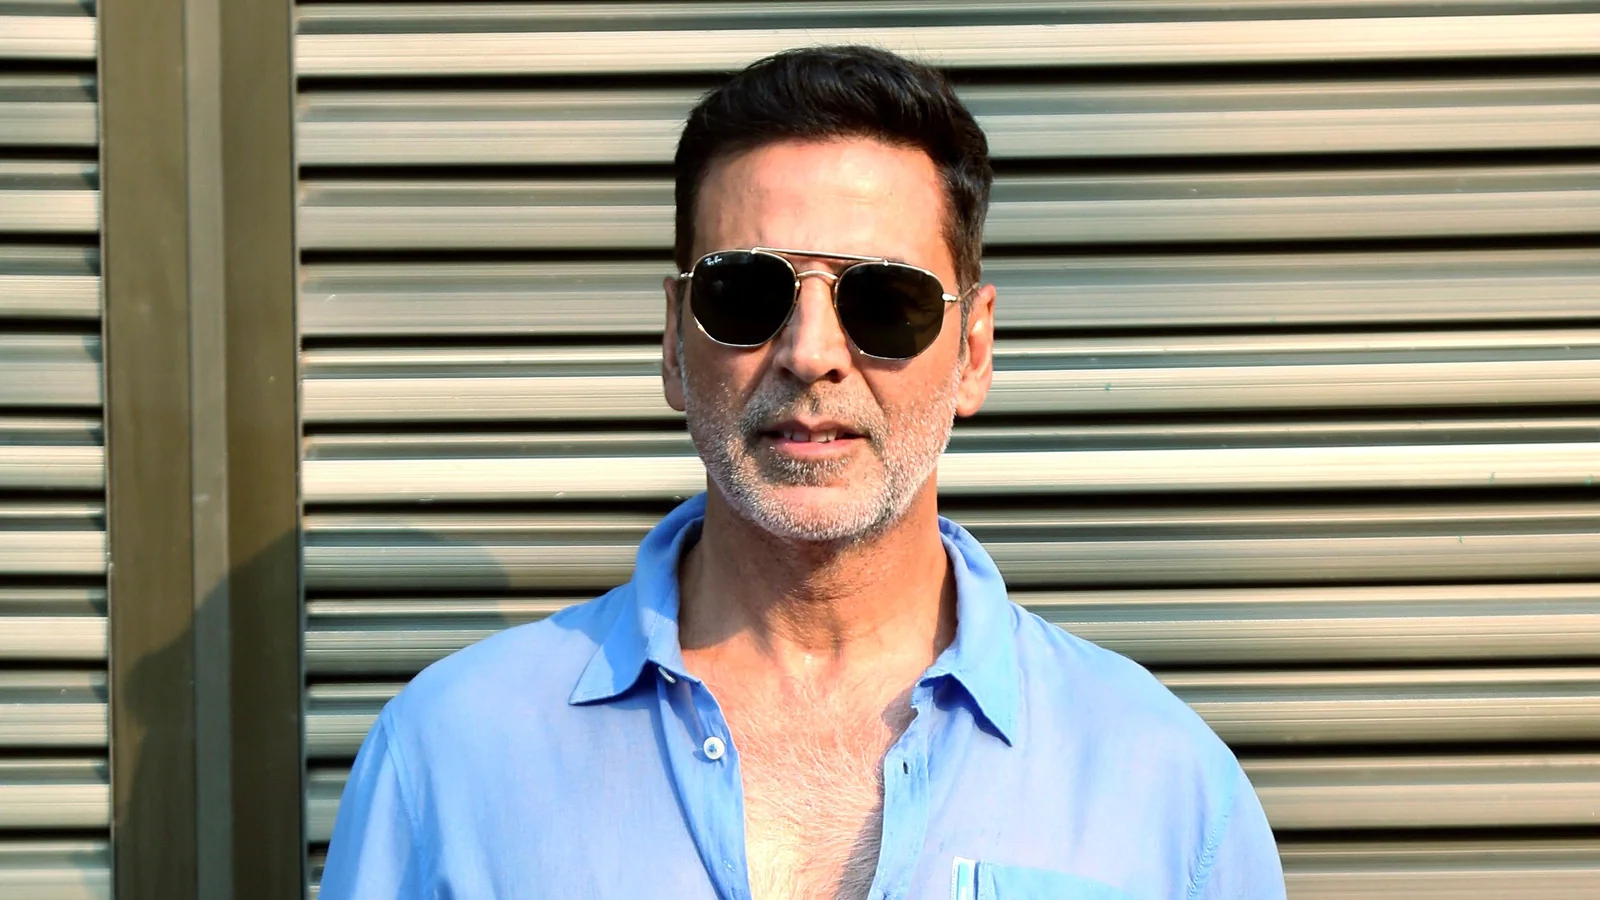 ‘I am working today not because of money but for passion,’ says Akshay Kumar ahead of Bachchhan Paandey release